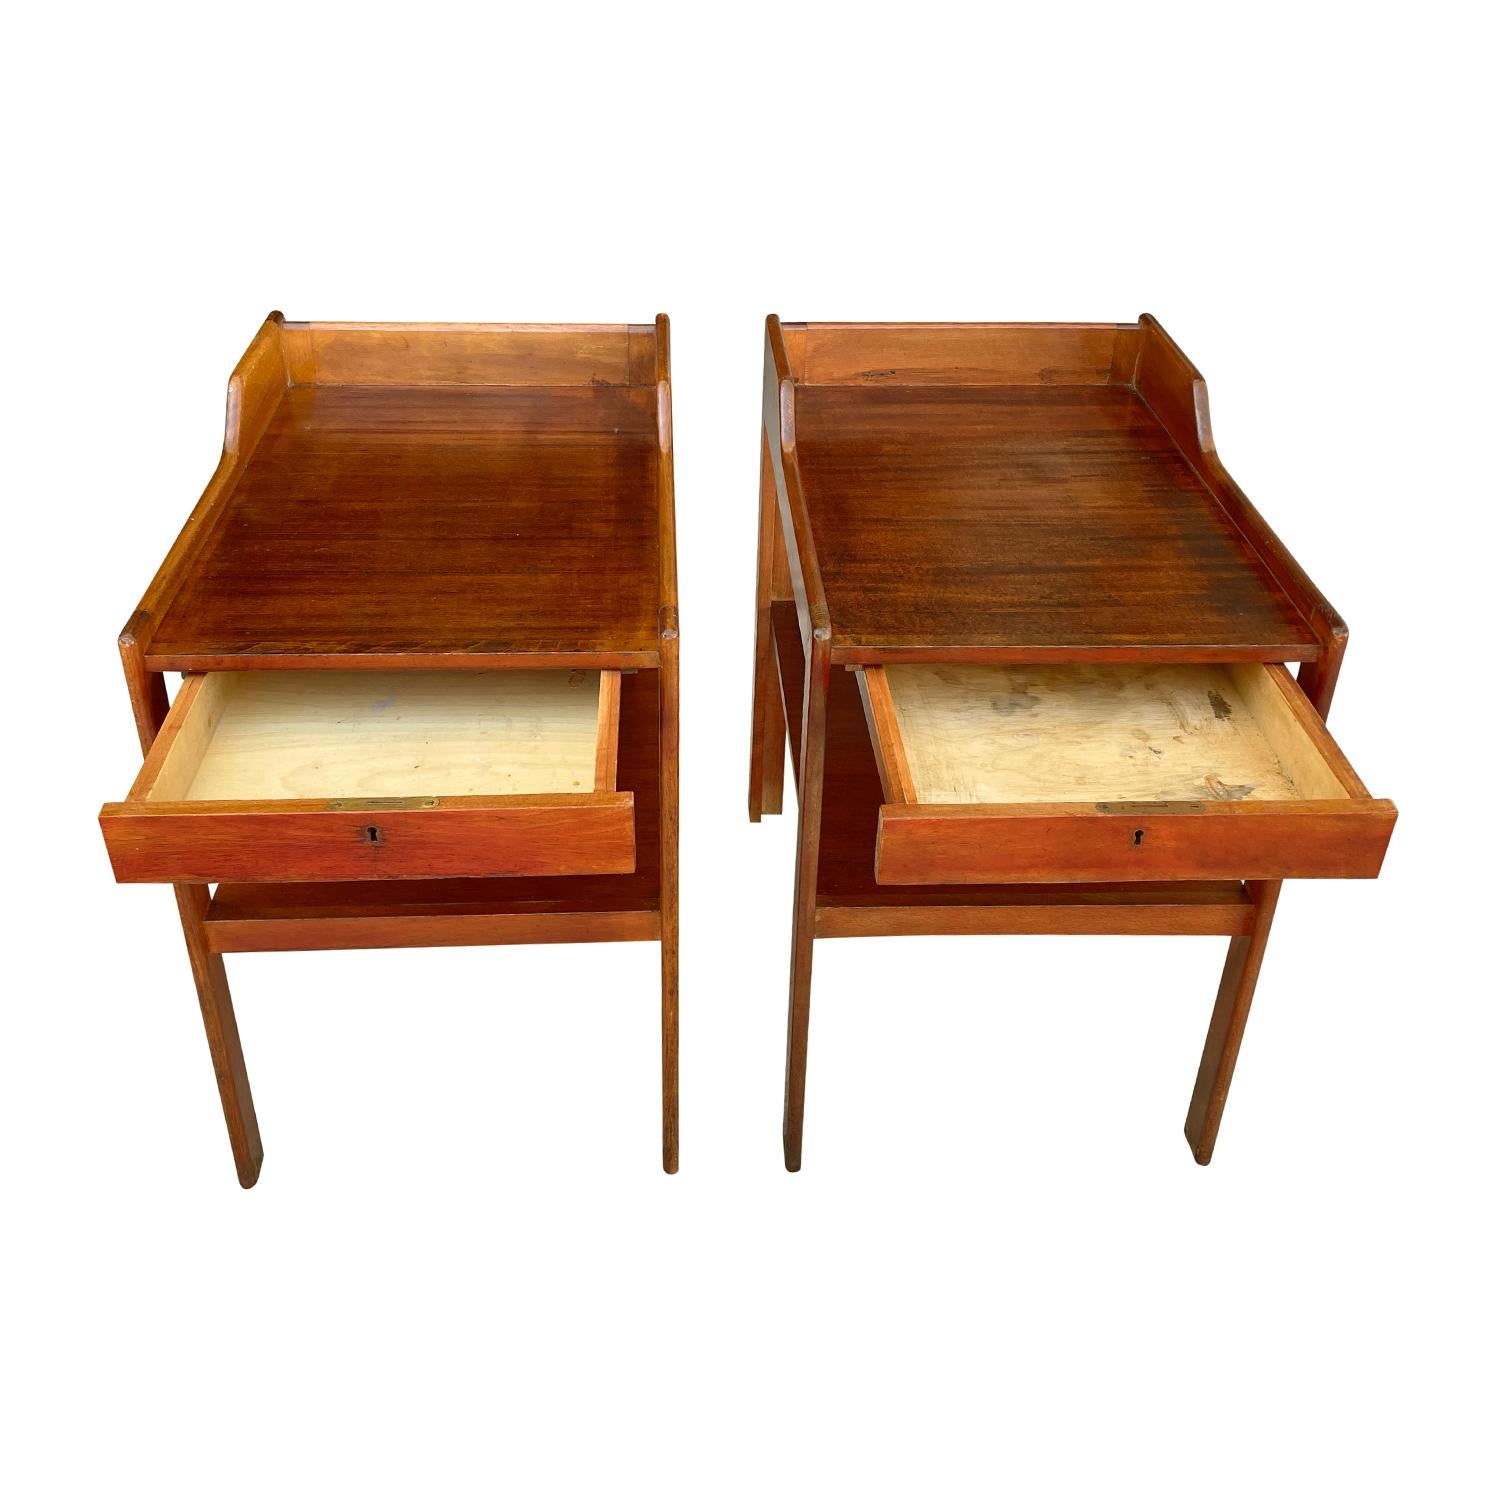 Hand-Carved 20th Century Swedish Mahogany Nightstands, Bedside Tables by Carl-Axel Acking